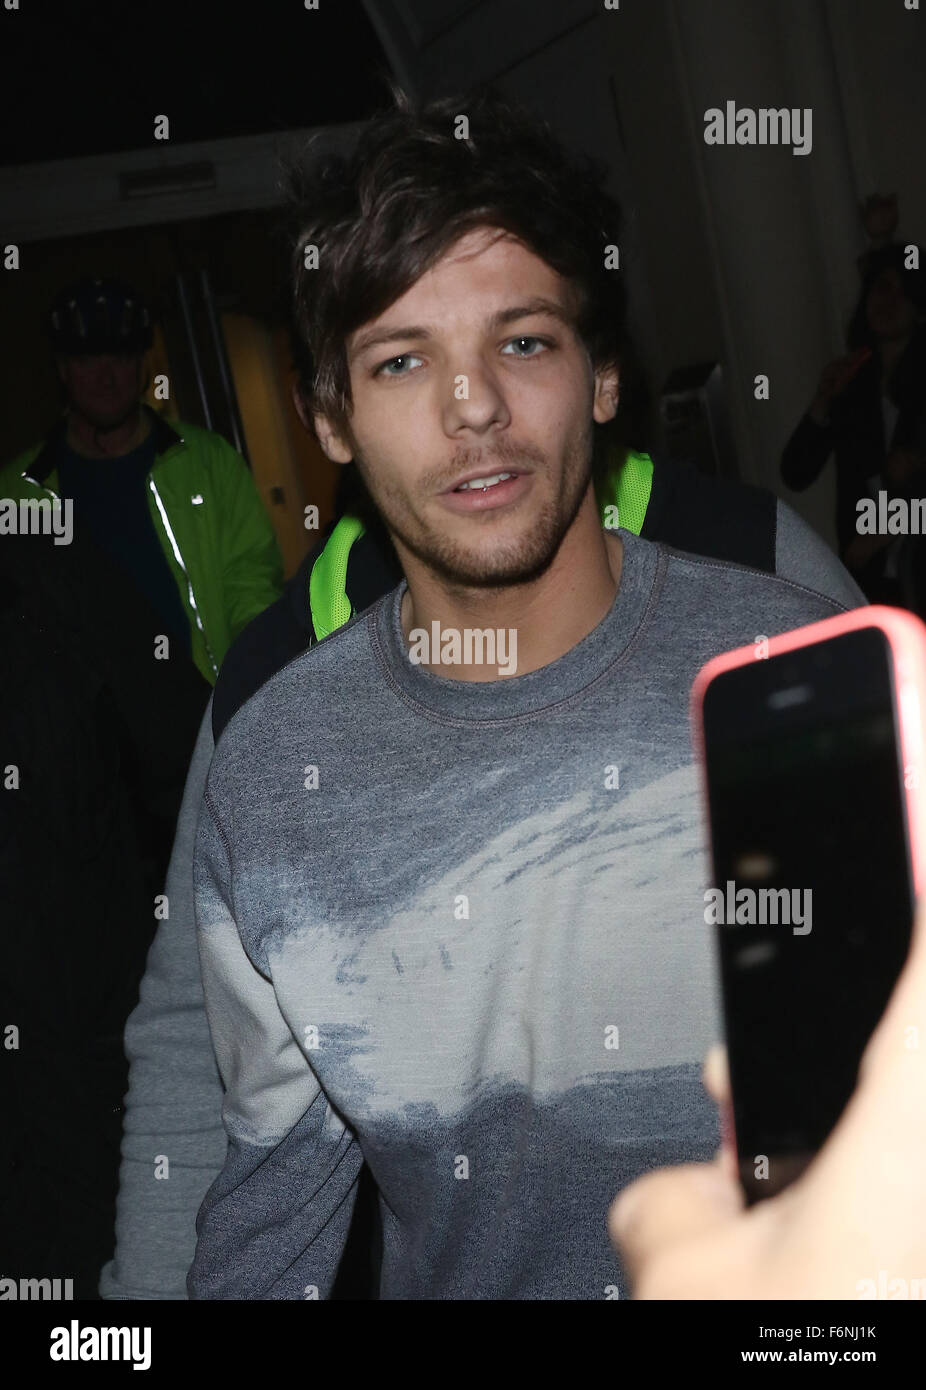 Louis Tomlinson Takes a Break From Tour, Hangs Out at Pub With Friends:  Photo 4989215, Louis Tomlinson Photos